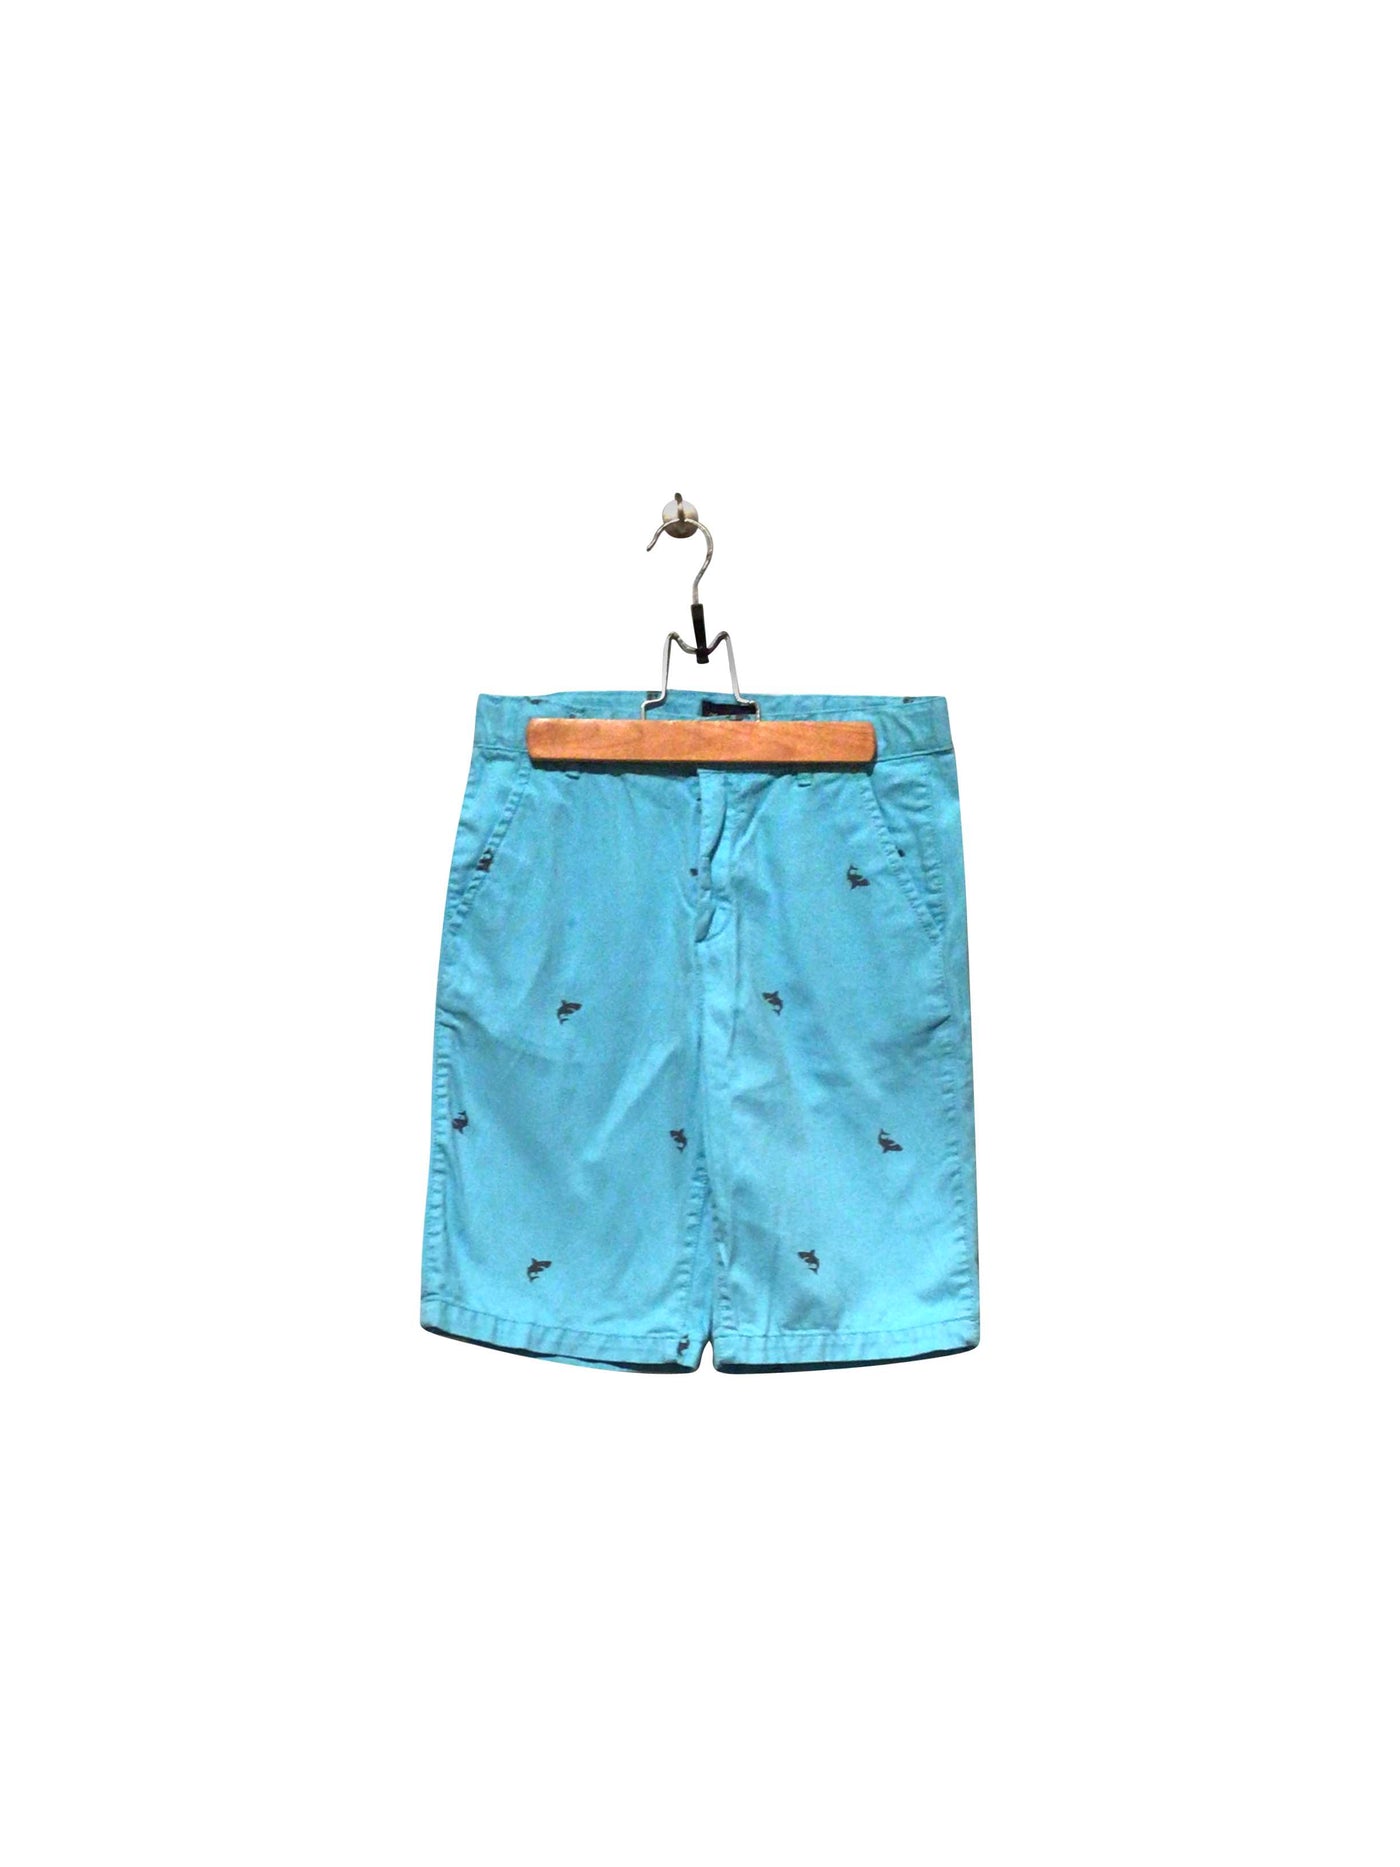 THE CHILDREN'S PLACE Regular fit Pant Shorts in Blue  -  12